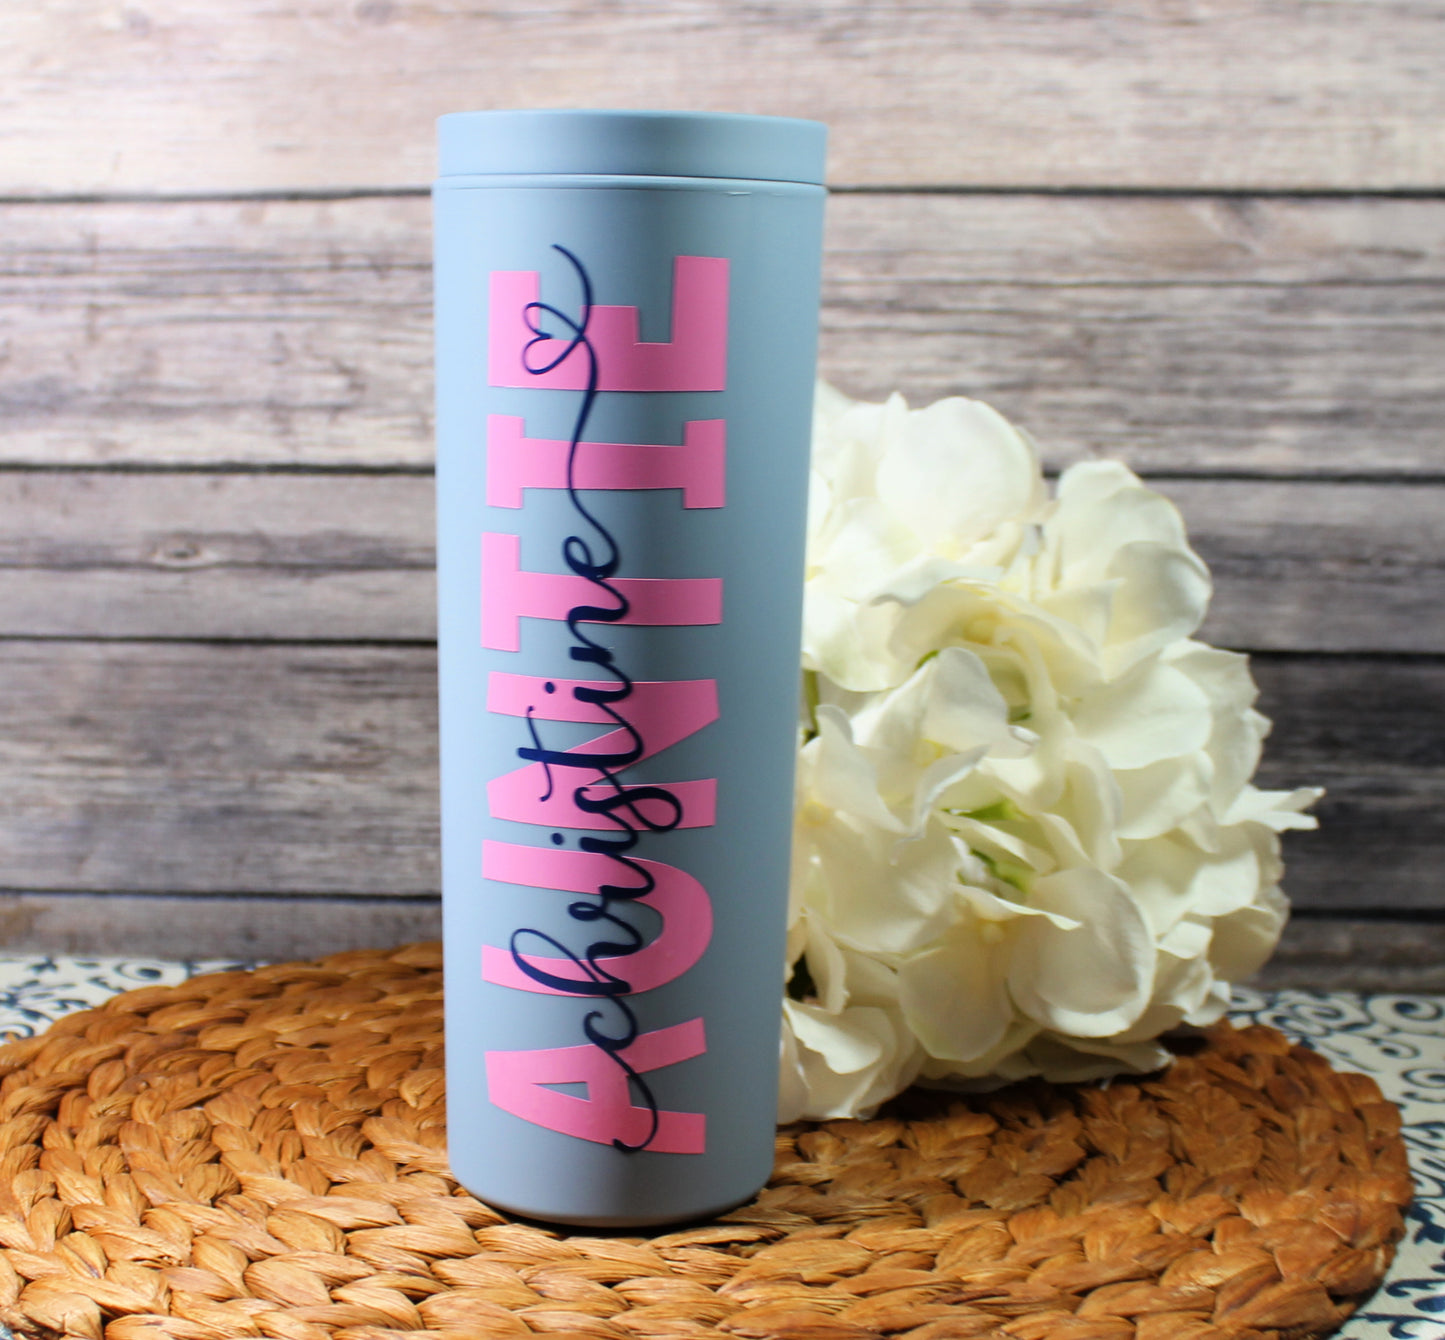 Gifts for aunt, auntie birthday gift, new aunt christmas gift, birth announcement tumbler, sister cup, tia mug